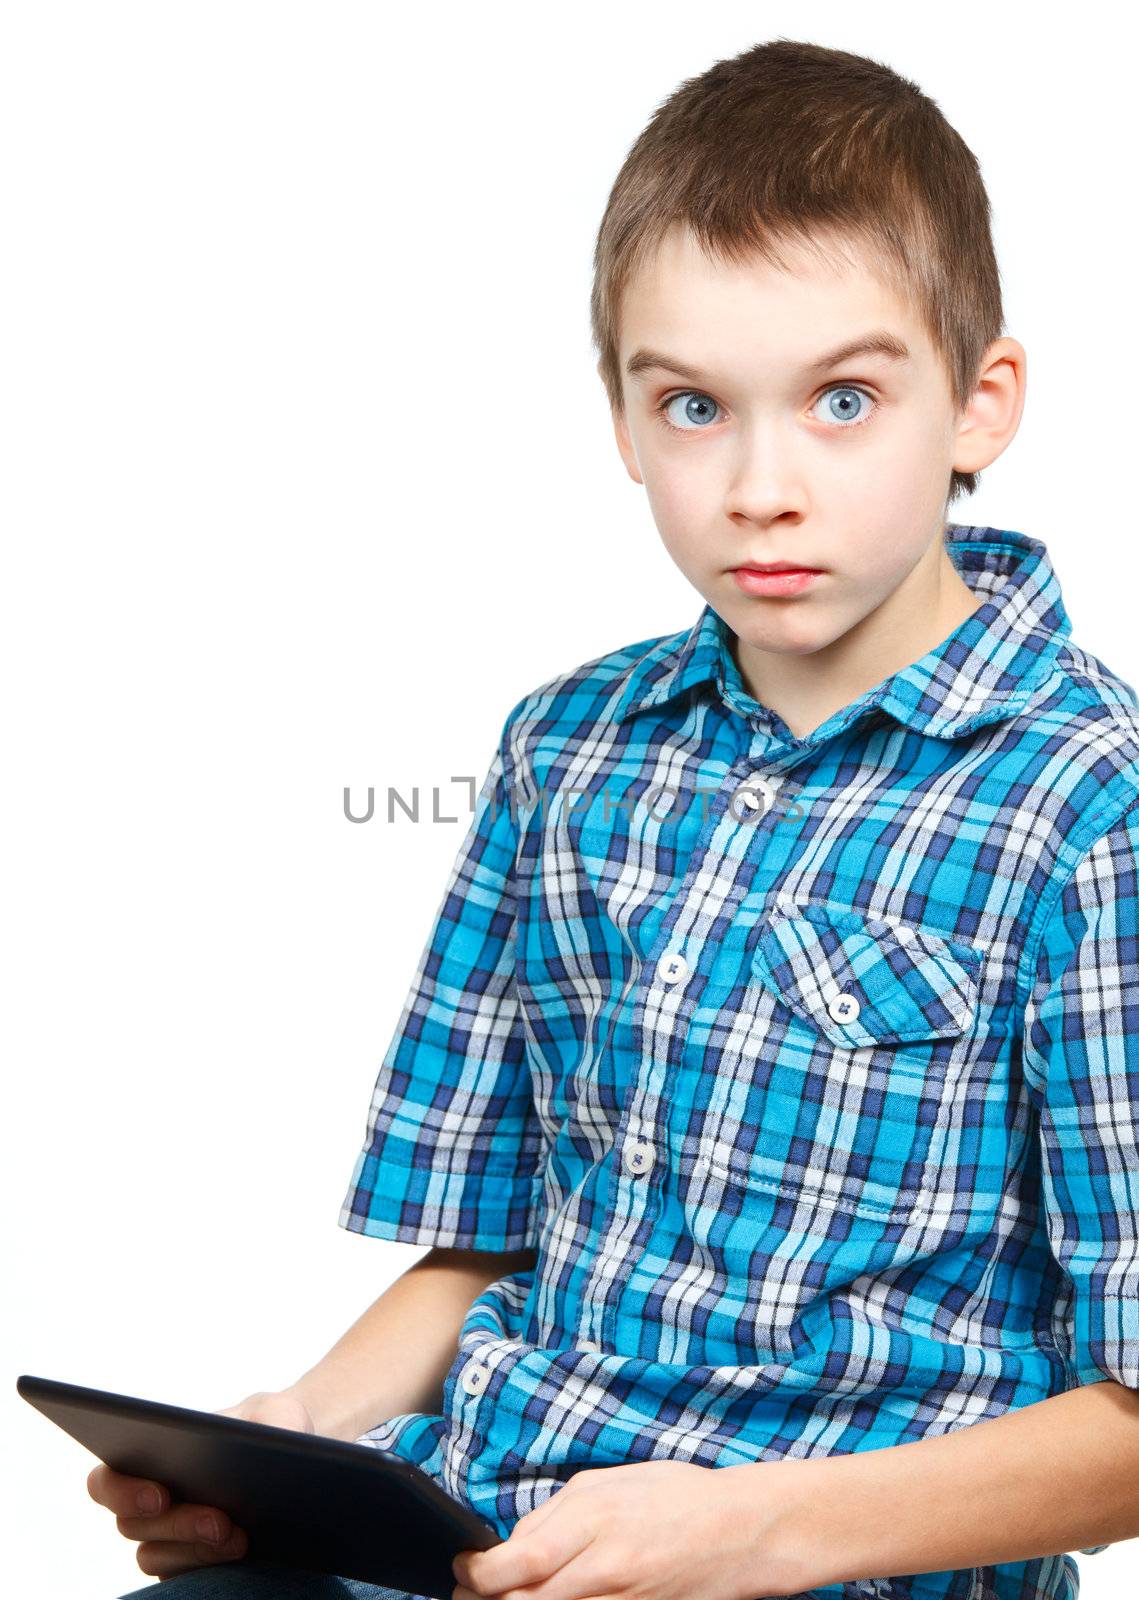 Portrait of 10 years boy wearing blue shirt holding a touch pad